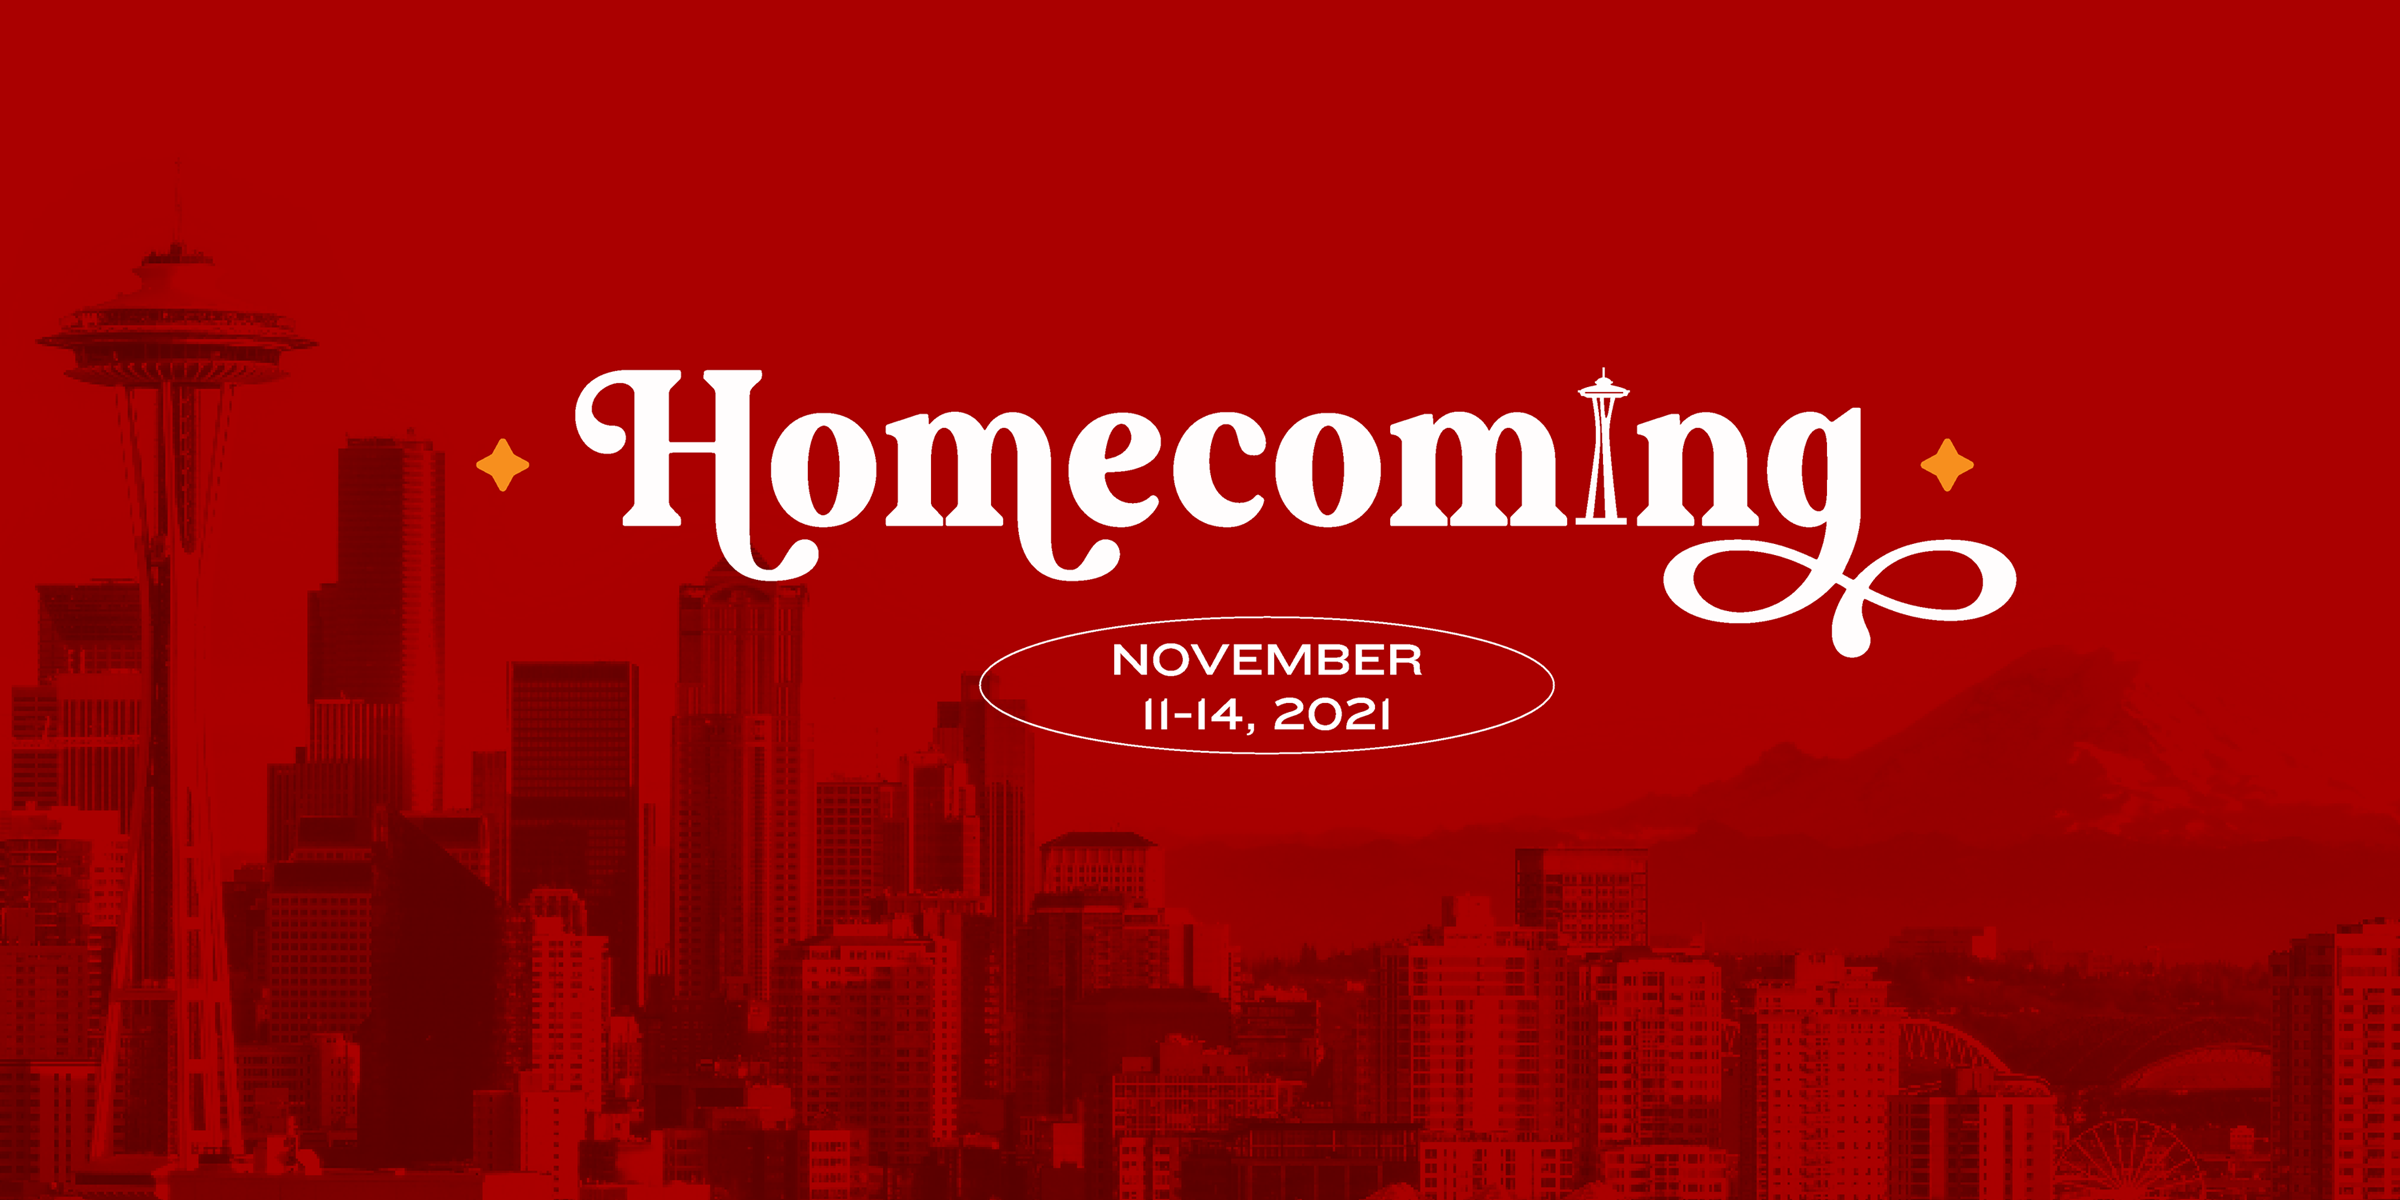 Image of Seattle skyline with a graphic above that reads Homecoming, Nov. 11-14, 2021.